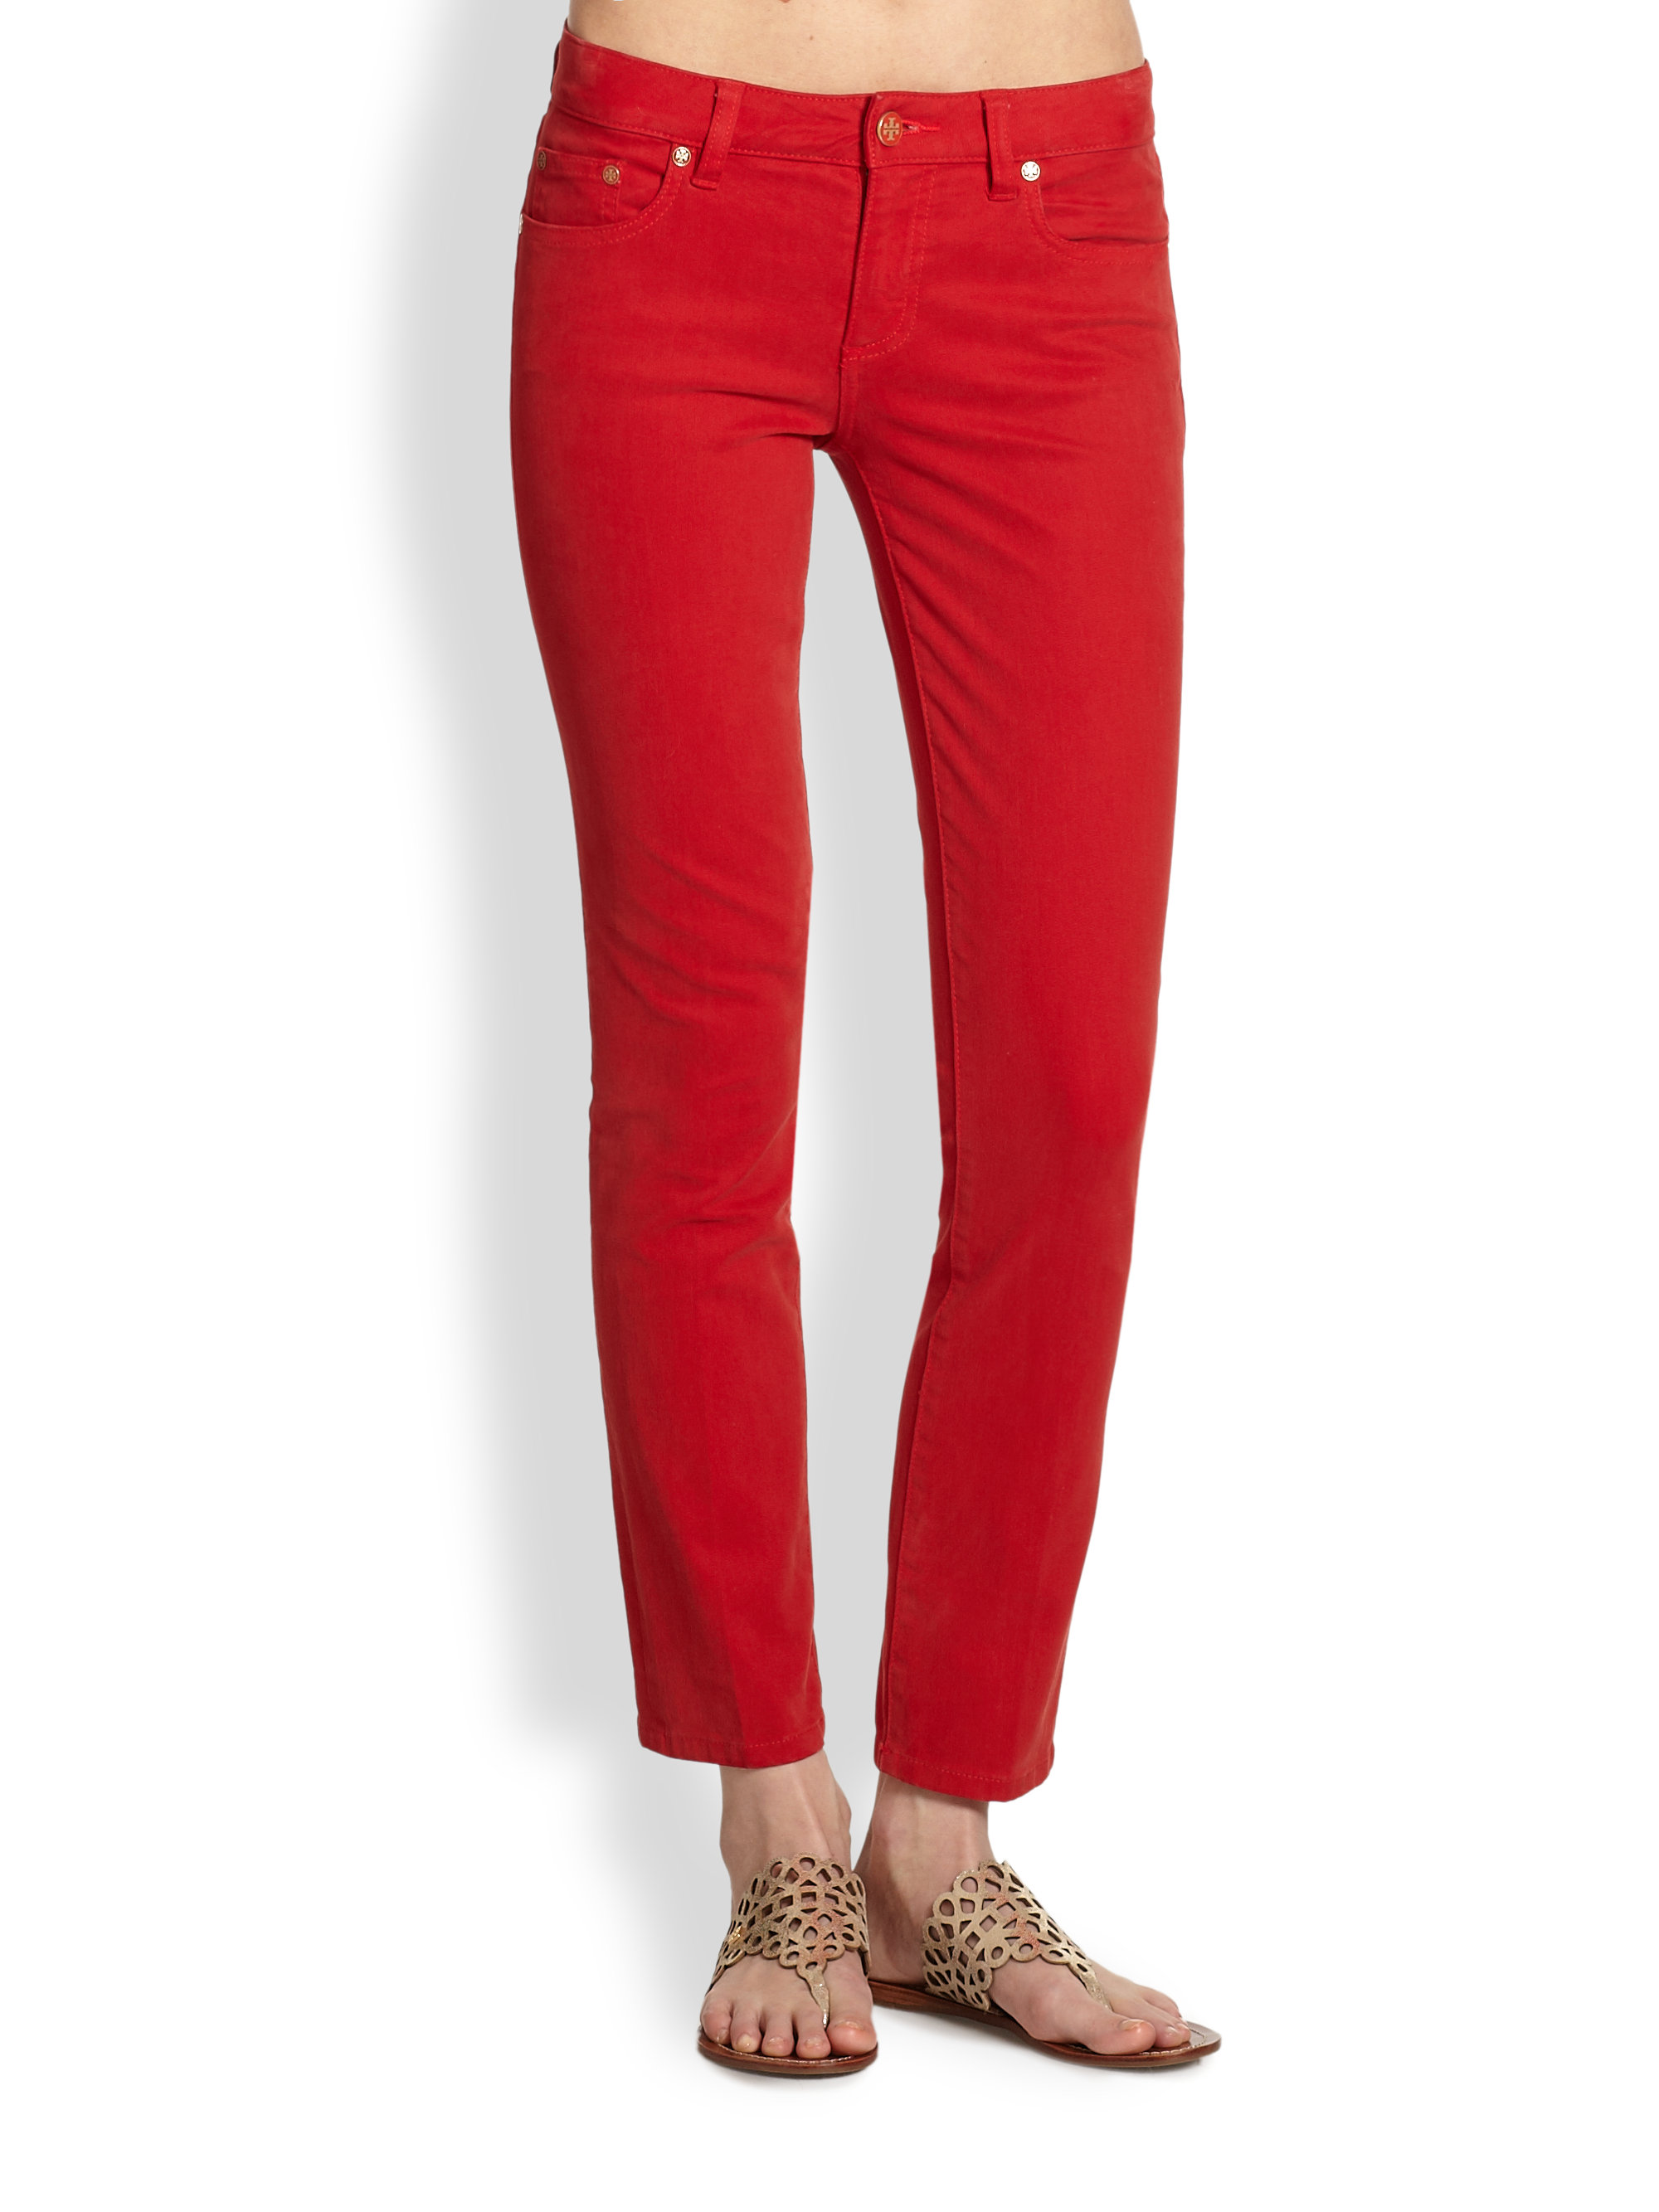 Tory Burch Alexa Cropped Skinny Jeans in Red | Lyst